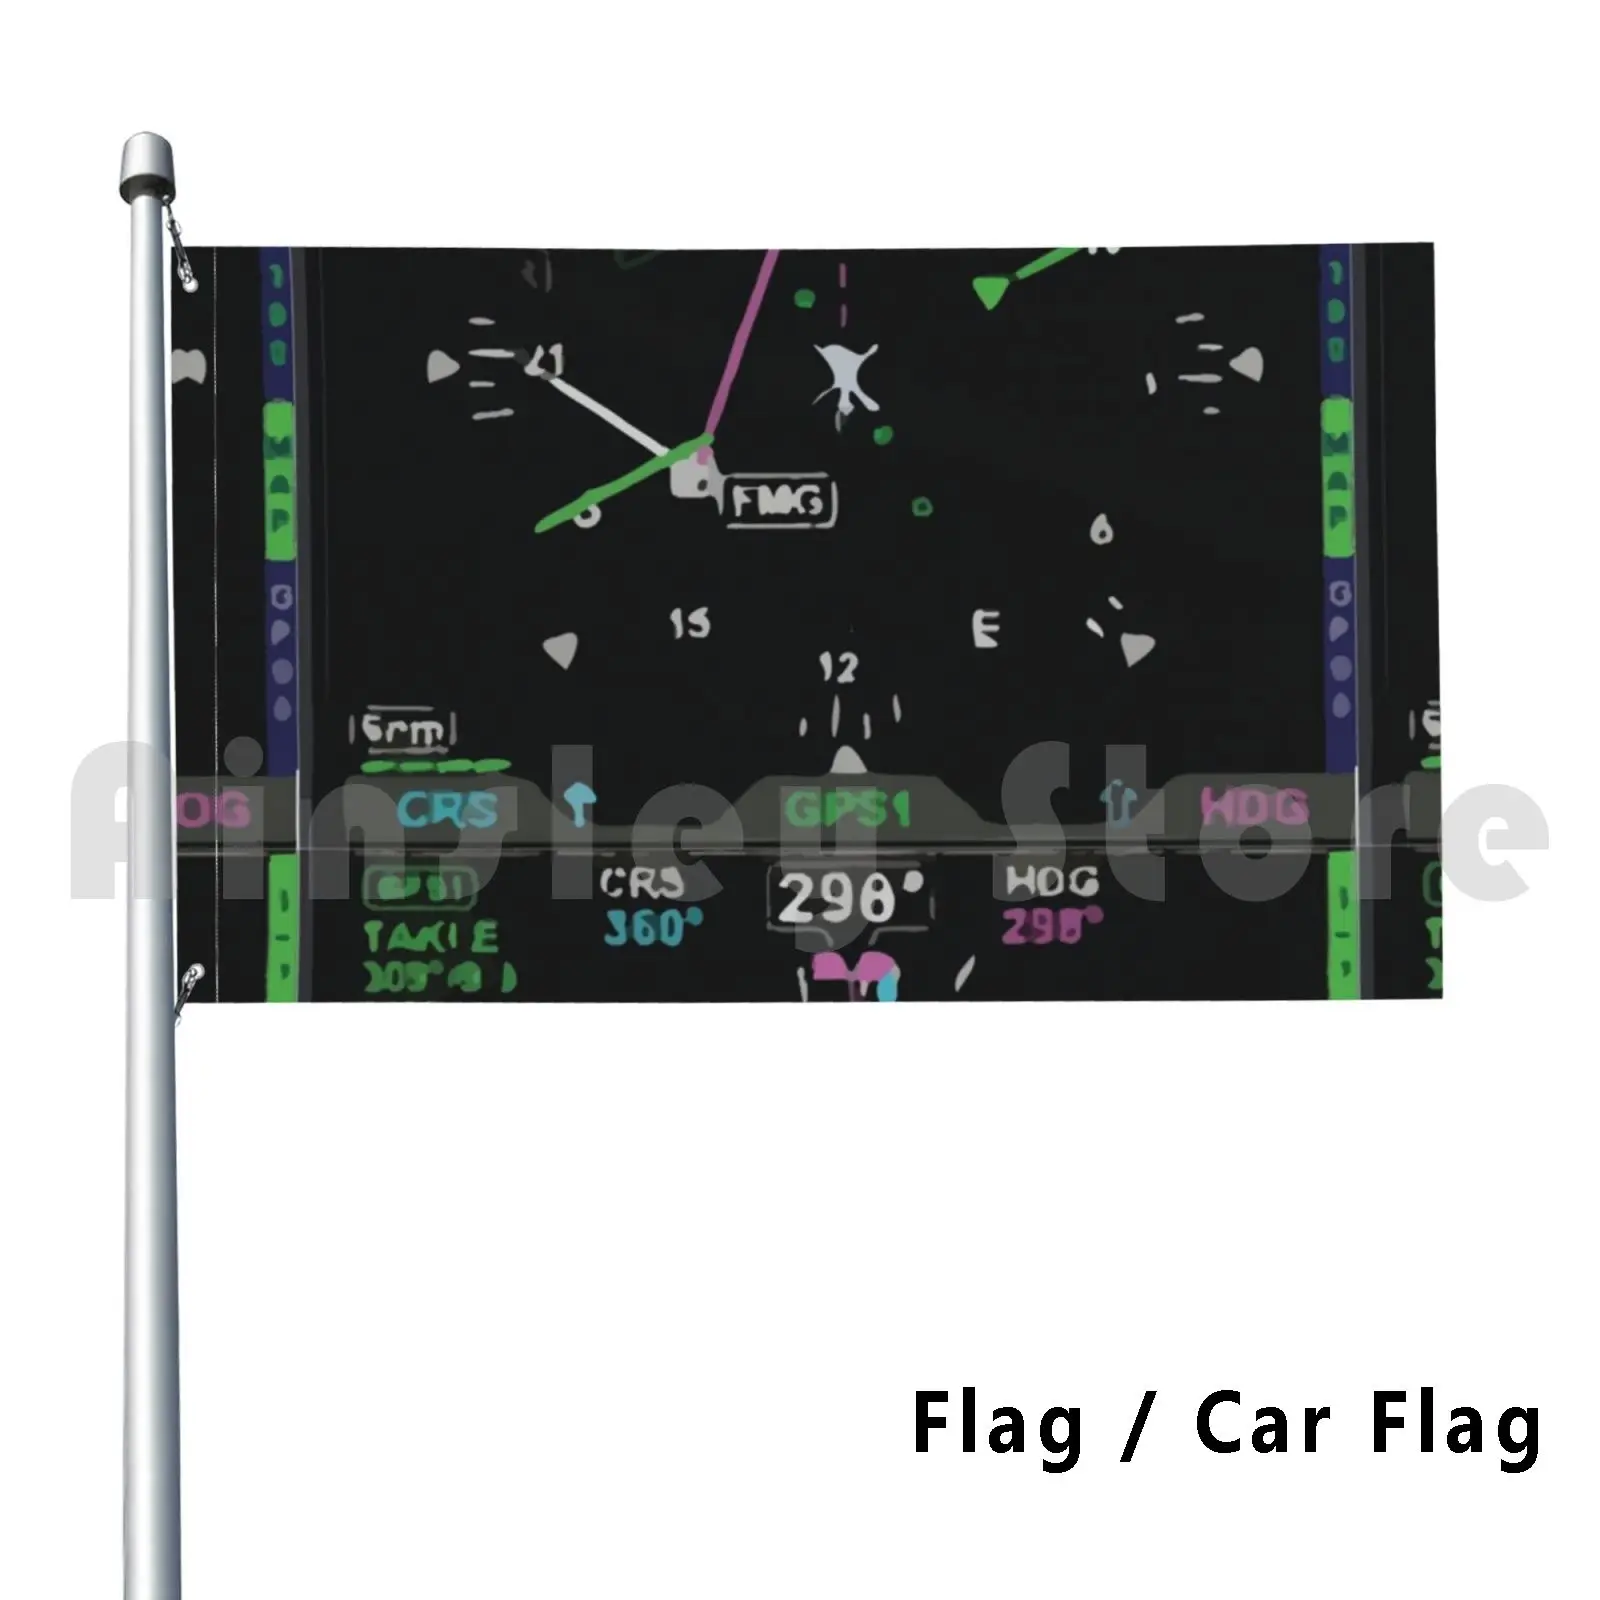 

Aviation Helicopter Airplane Cockpit Instrument Outdoor Decor Flag Car Flag Pilot Flight Airport Airbus Airplane Boeing